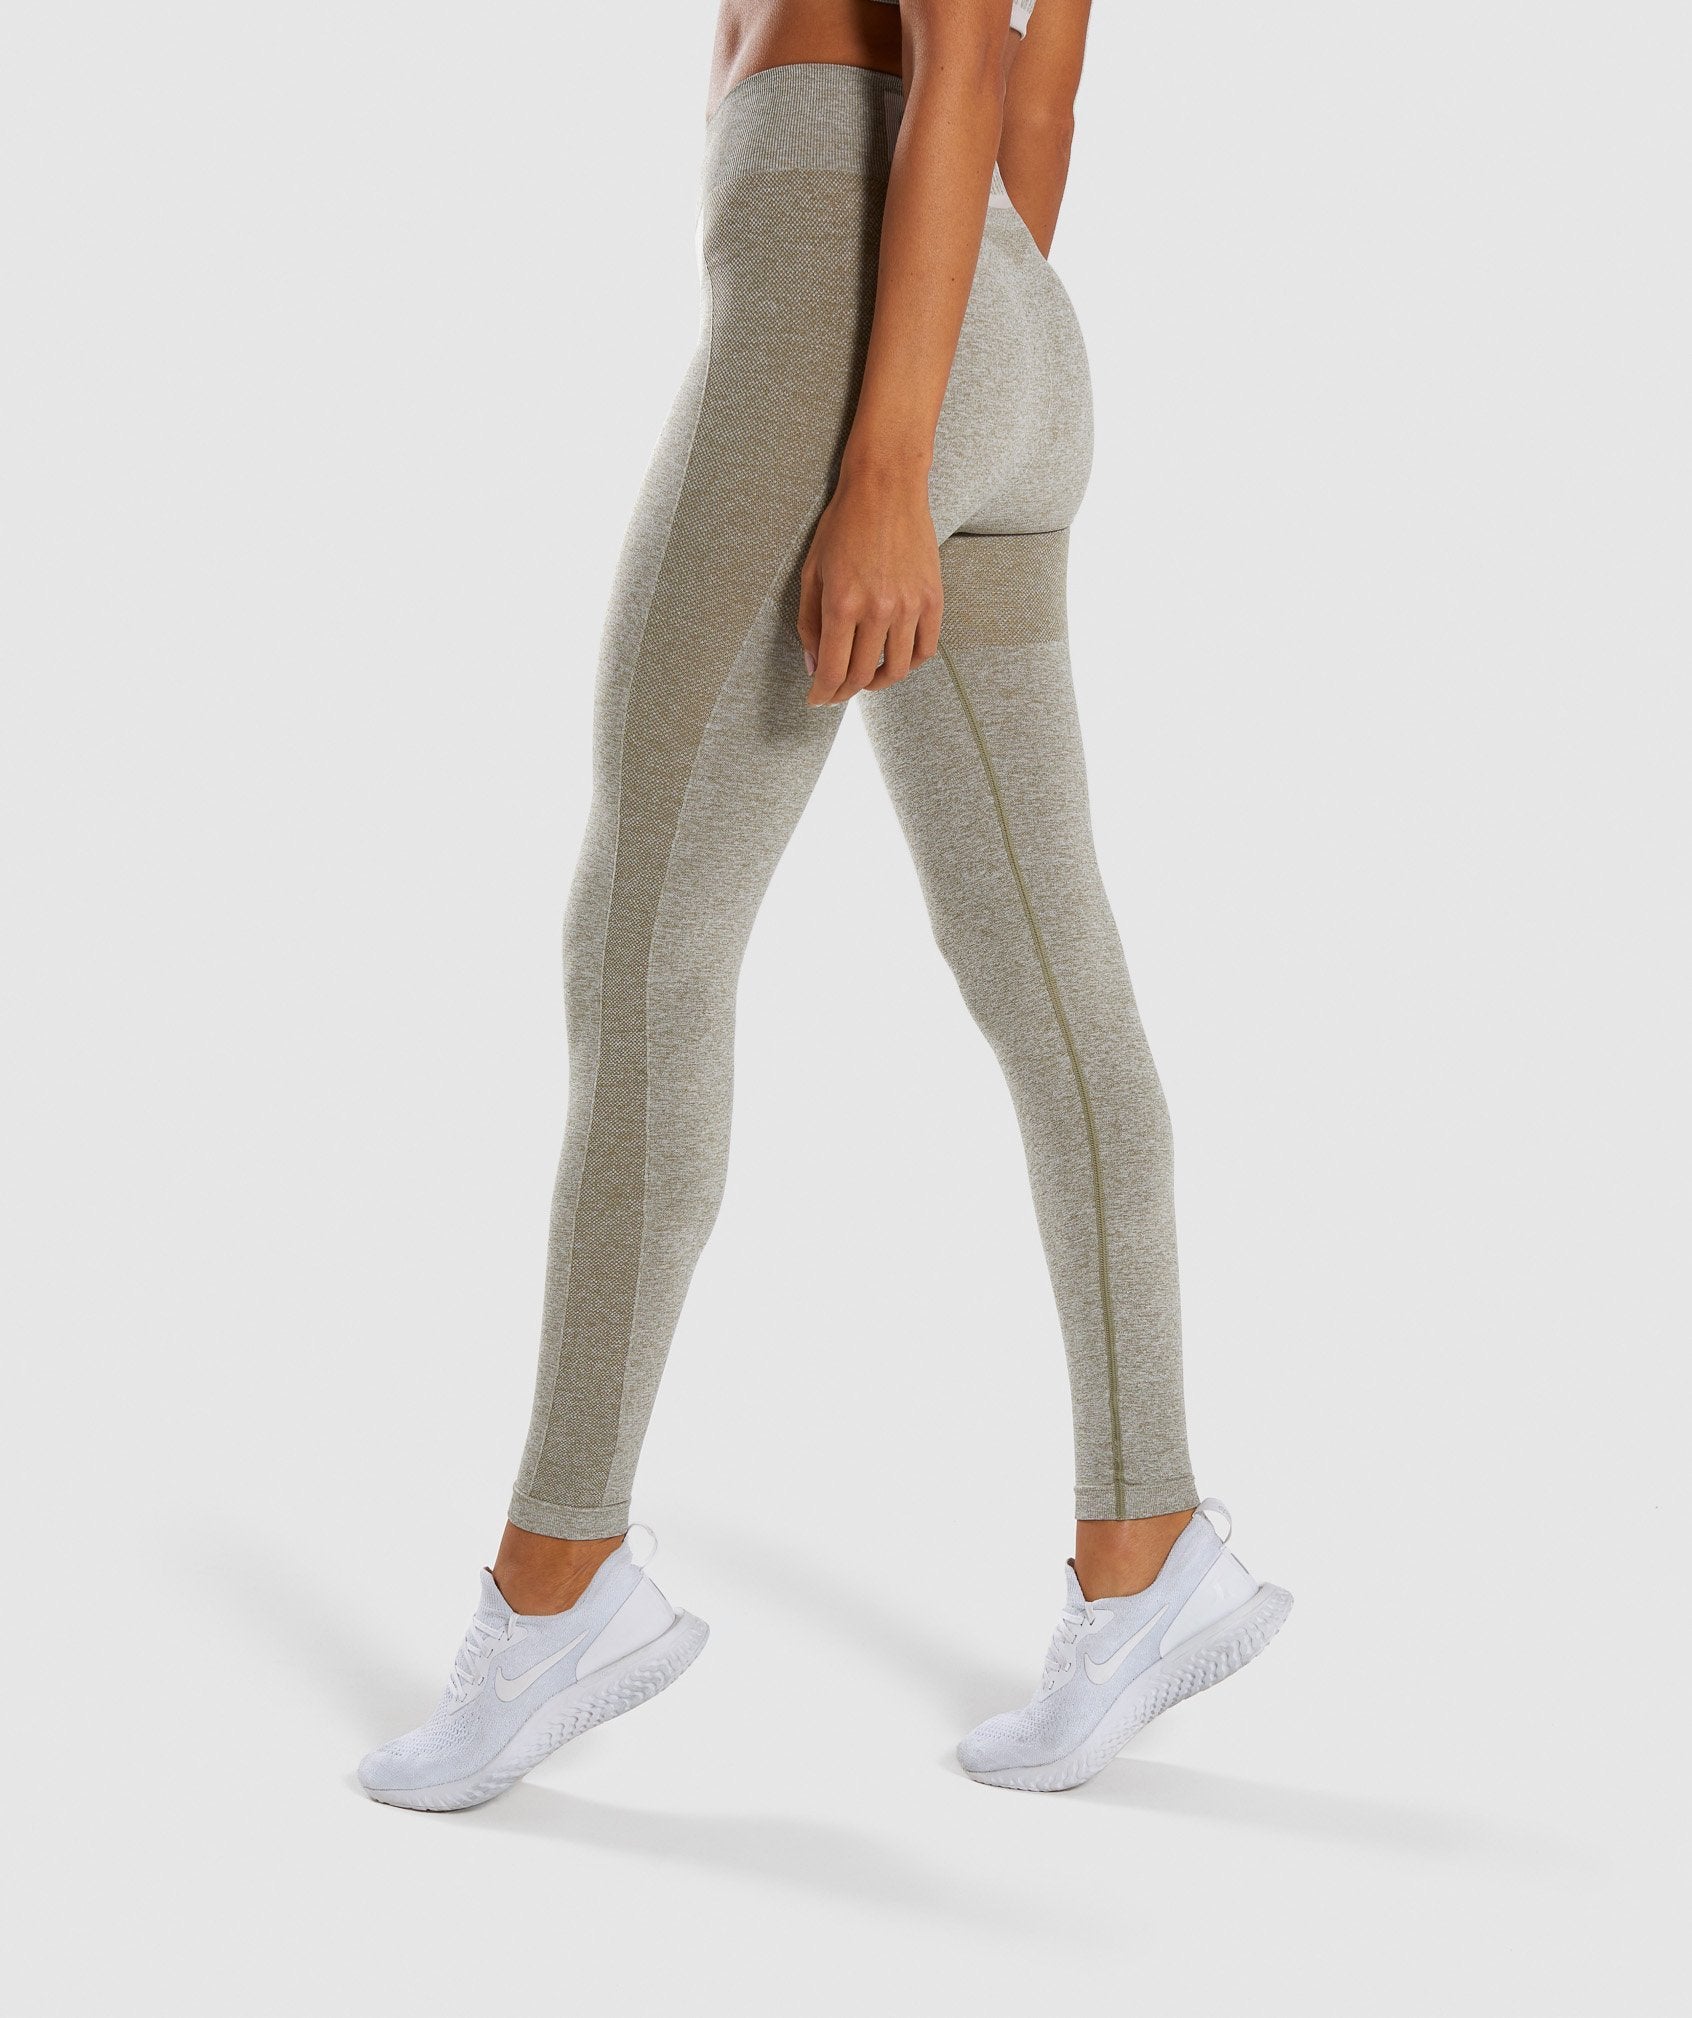 Flex High Waisted Leggings in Washed Khaki Marl/Blush Nude - view 3